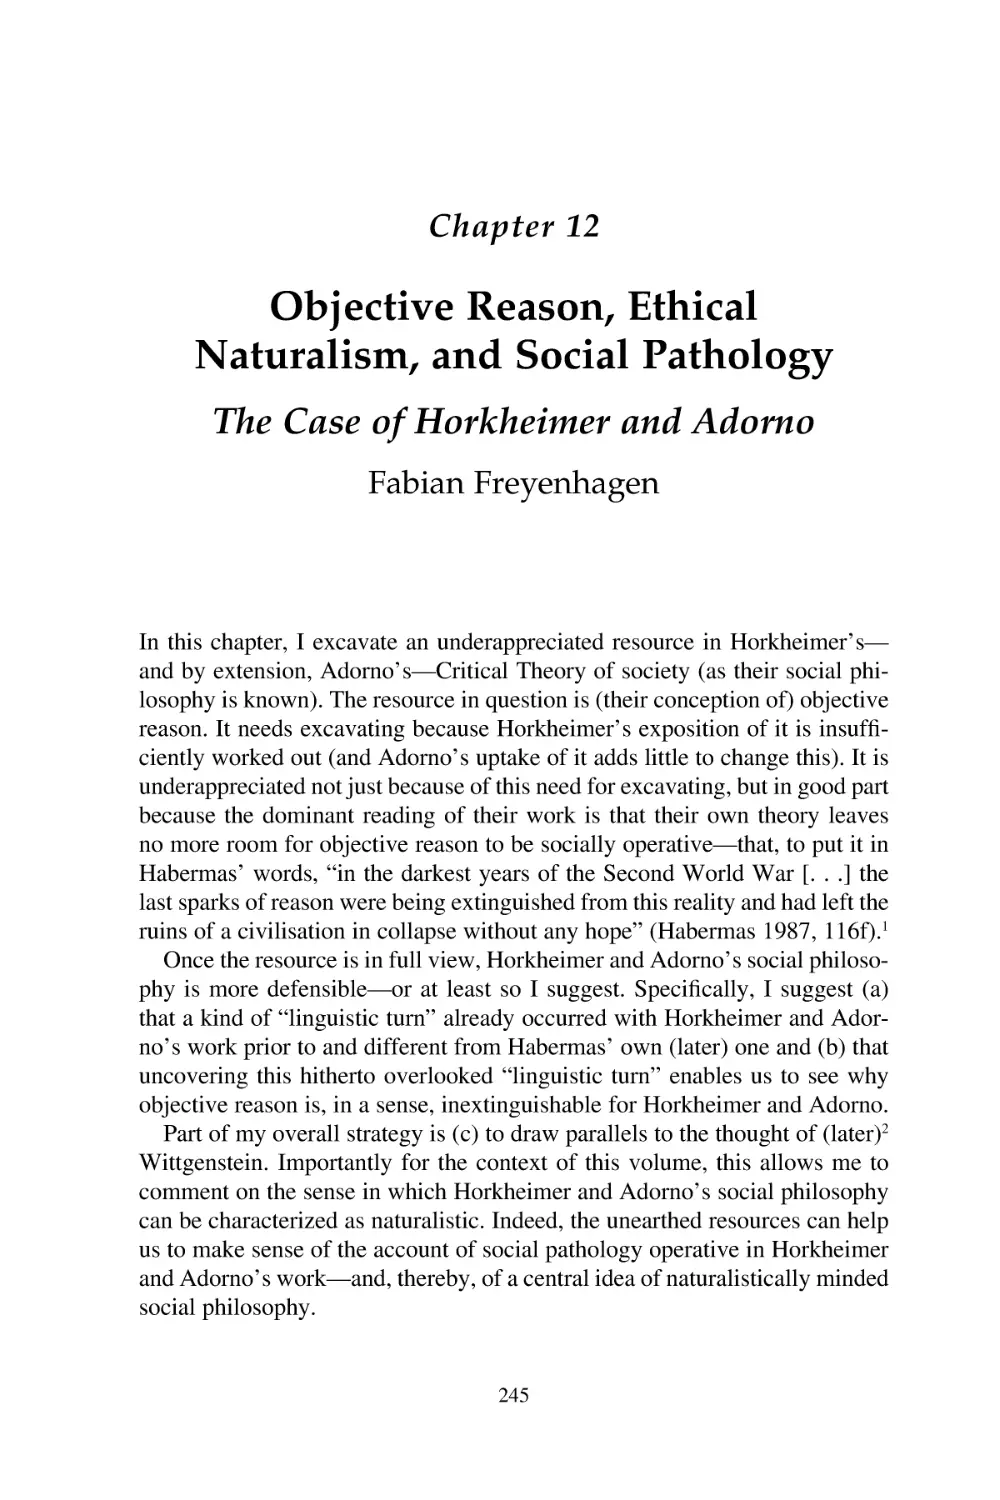 12 Objective Reason, Ethical Naturalism, and Social Pathology